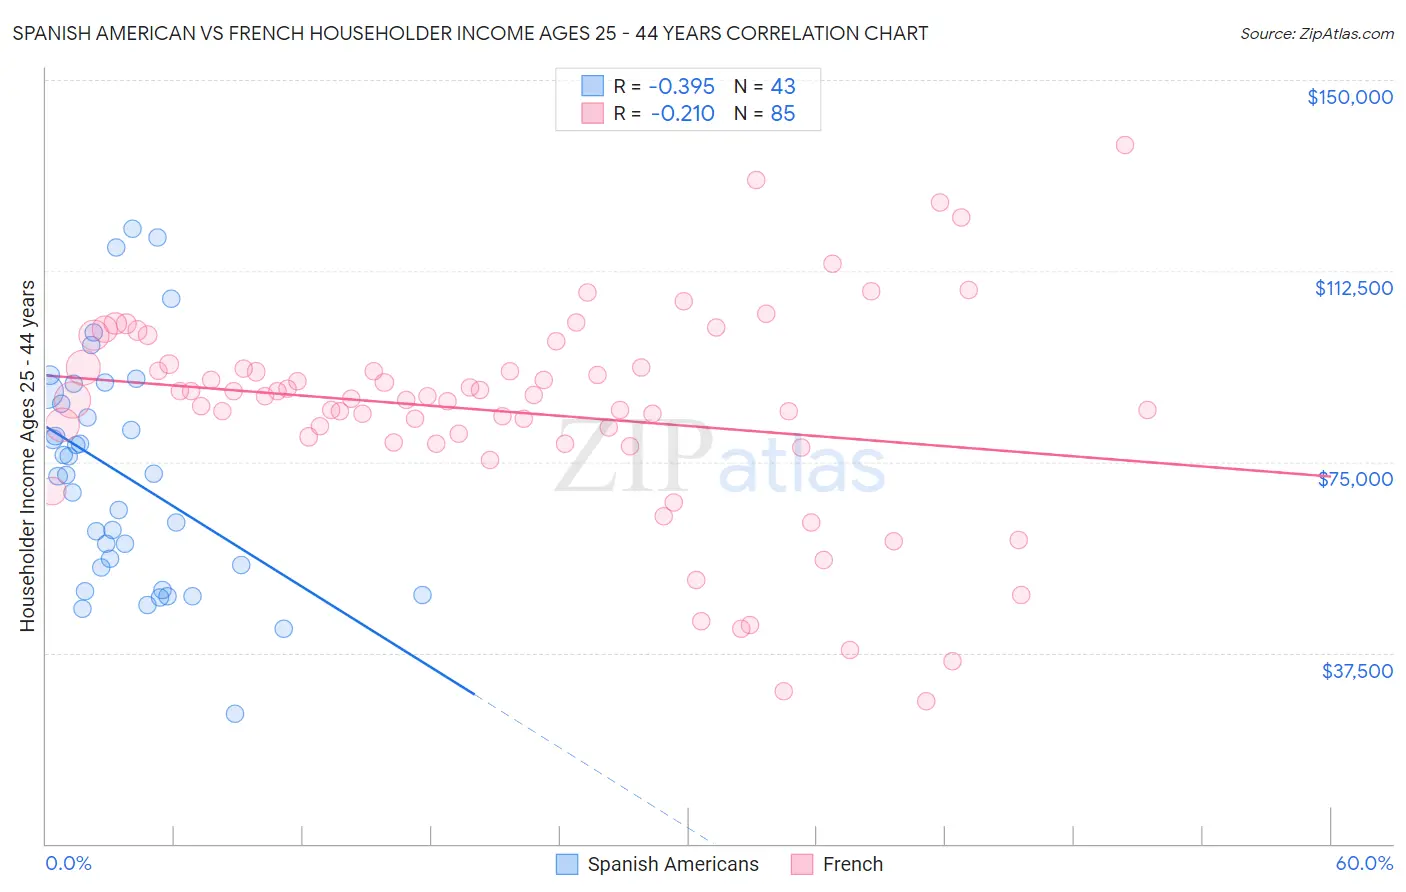 Spanish American vs French Householder Income Ages 25 - 44 years